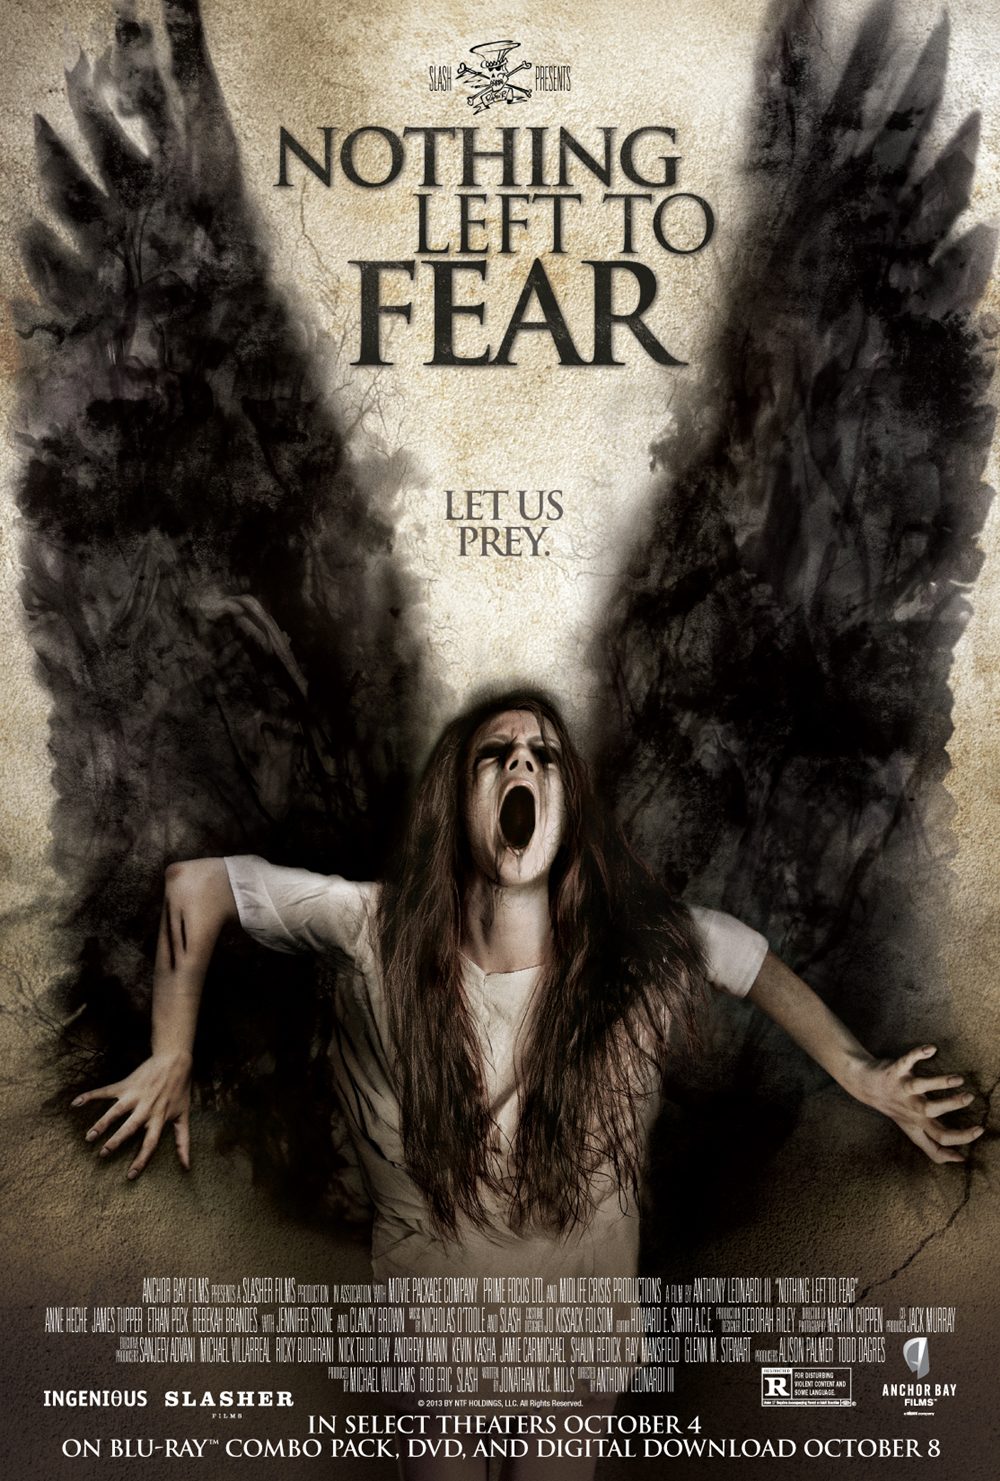 NOTHING LEFT TO FEAR Trailer, Poster
